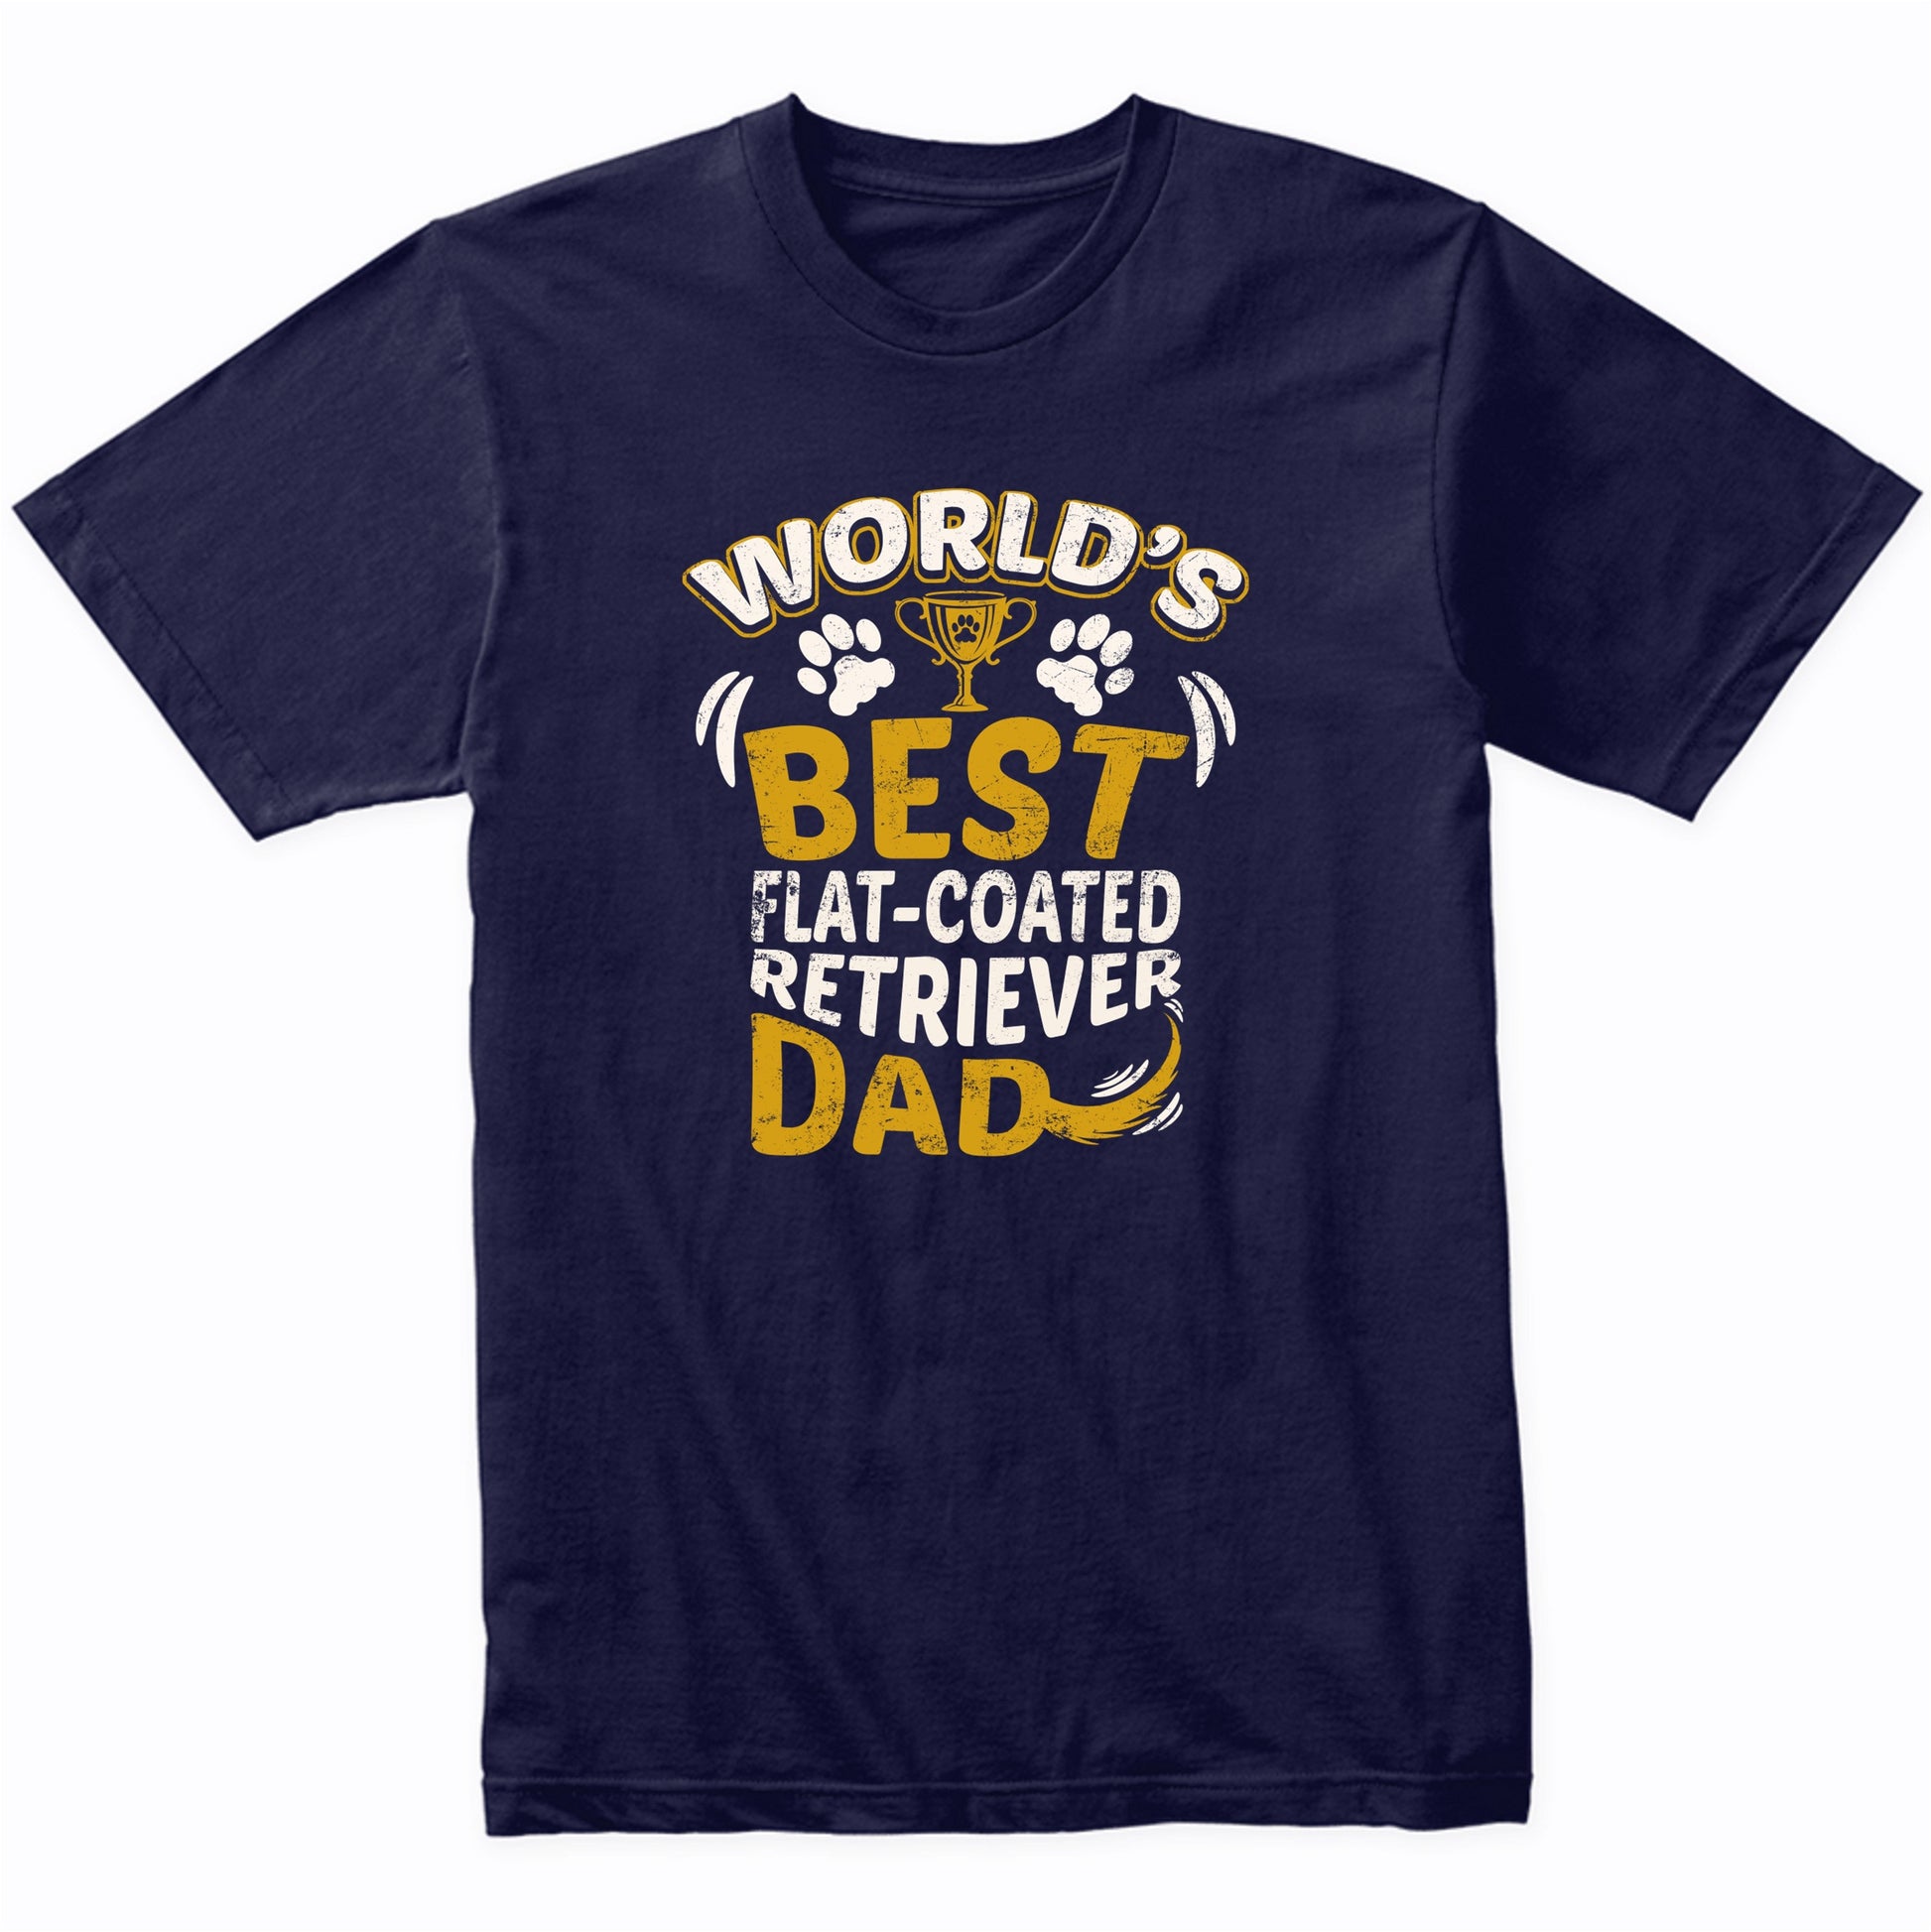 World's Best Flat-Coated Retriever Dad Graphic T-Shirt